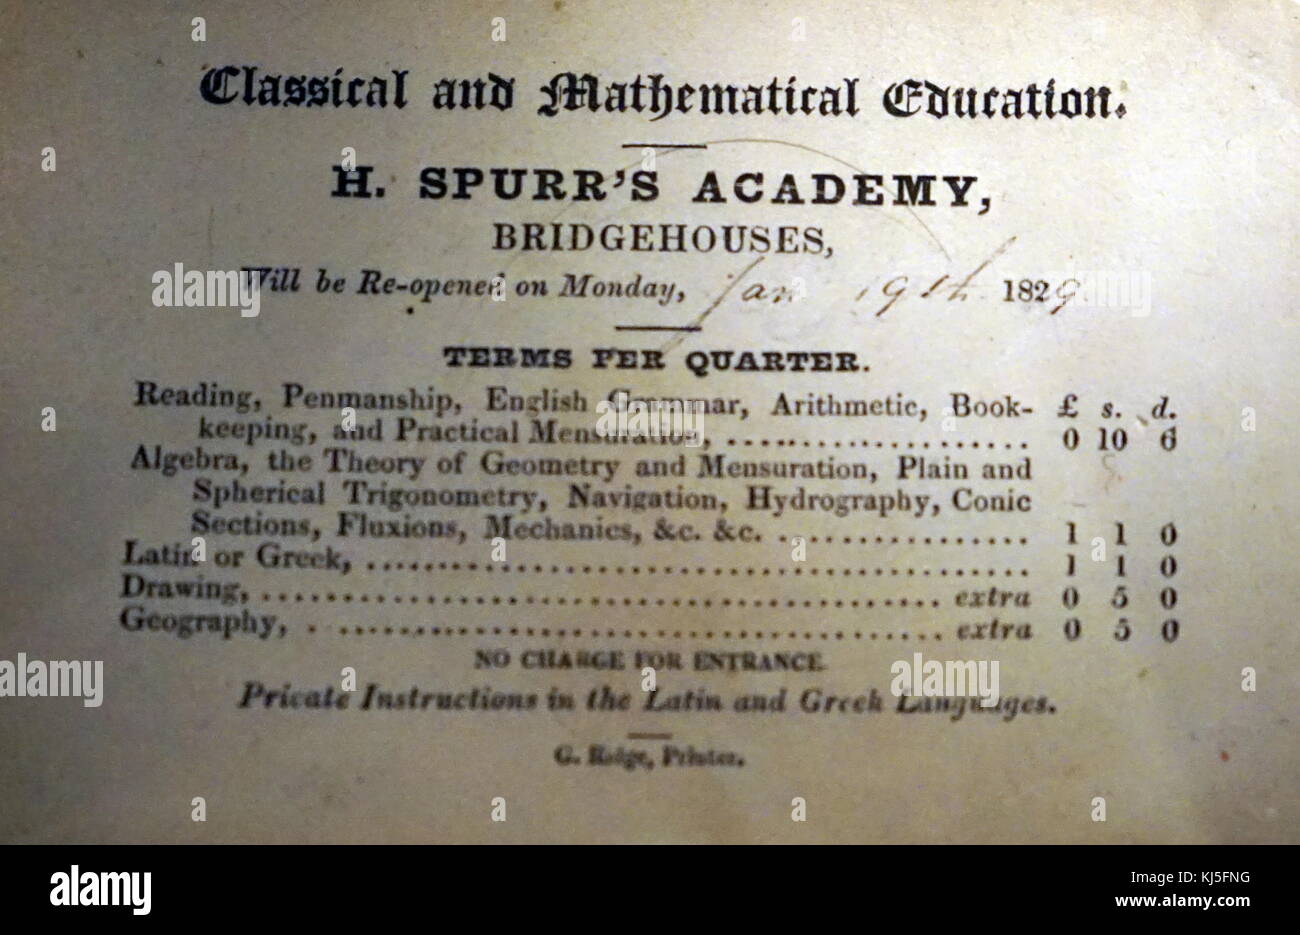 H. Spurr's Academy Bridgehouses price list for classes and admittance. Dated 19th Century Stock Photo